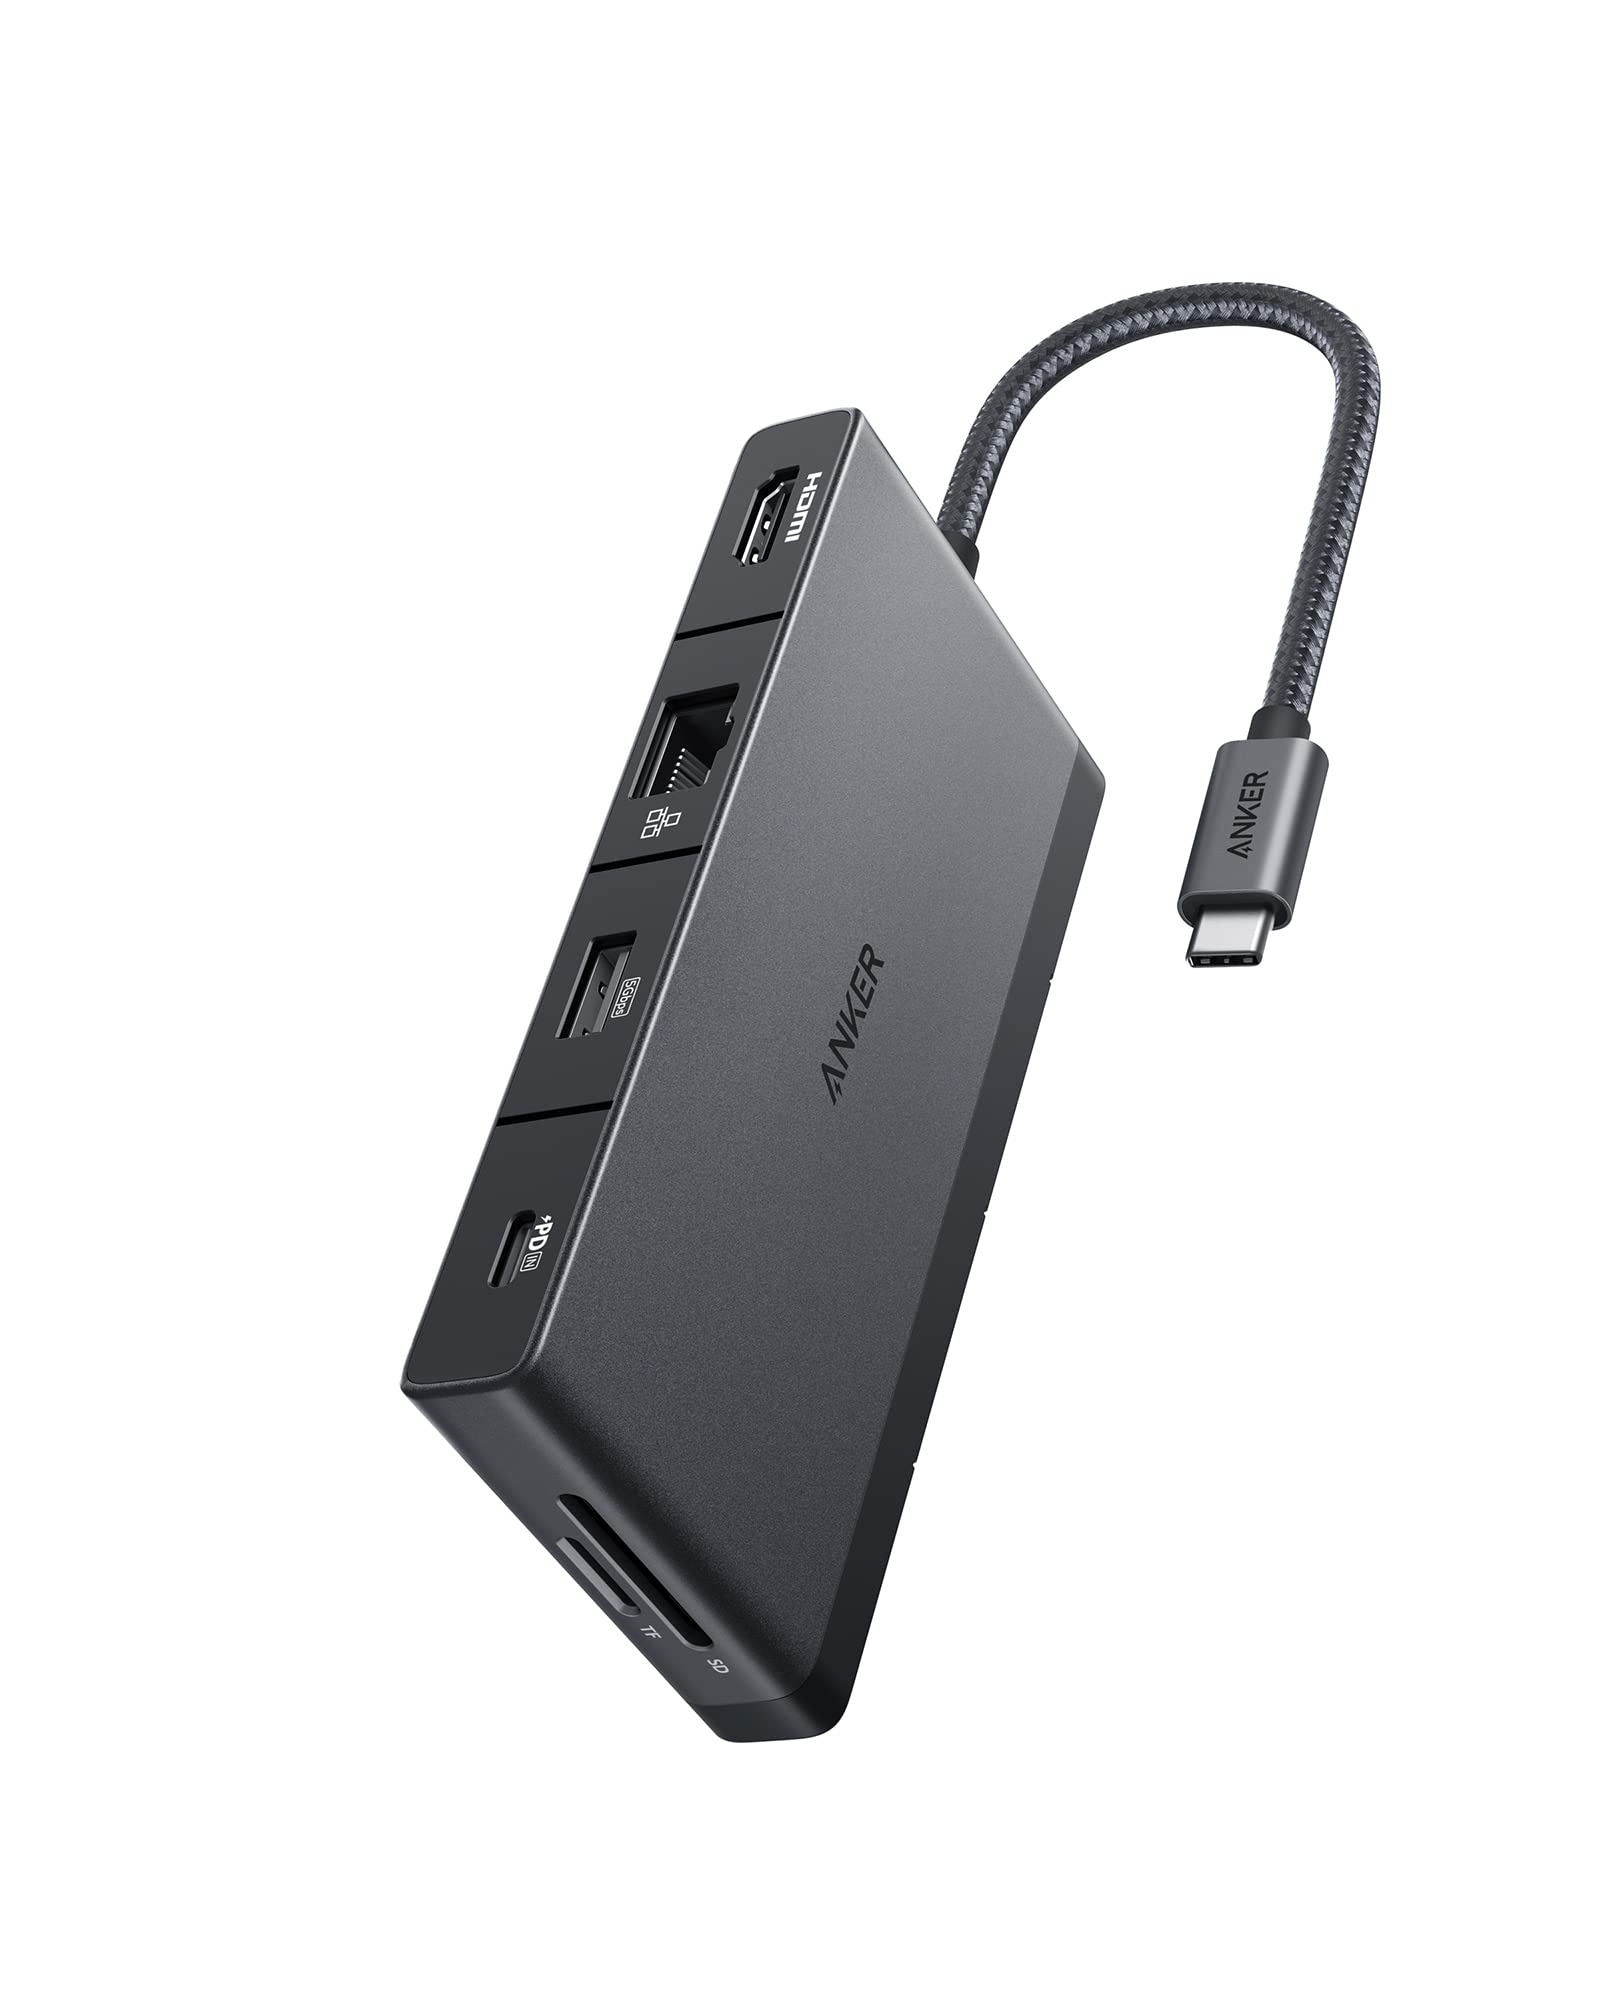 Anker USB C Hub, 552 USB-C Hub (9-in-1, 4K HDMI) with 100W Power Delivery, 4K@30Hz HDMI, 4 USB-C and USB-A Data Ports, Ethernet and SD/microSD Card Slot for MacBook, HP, Dell Laptops, and More